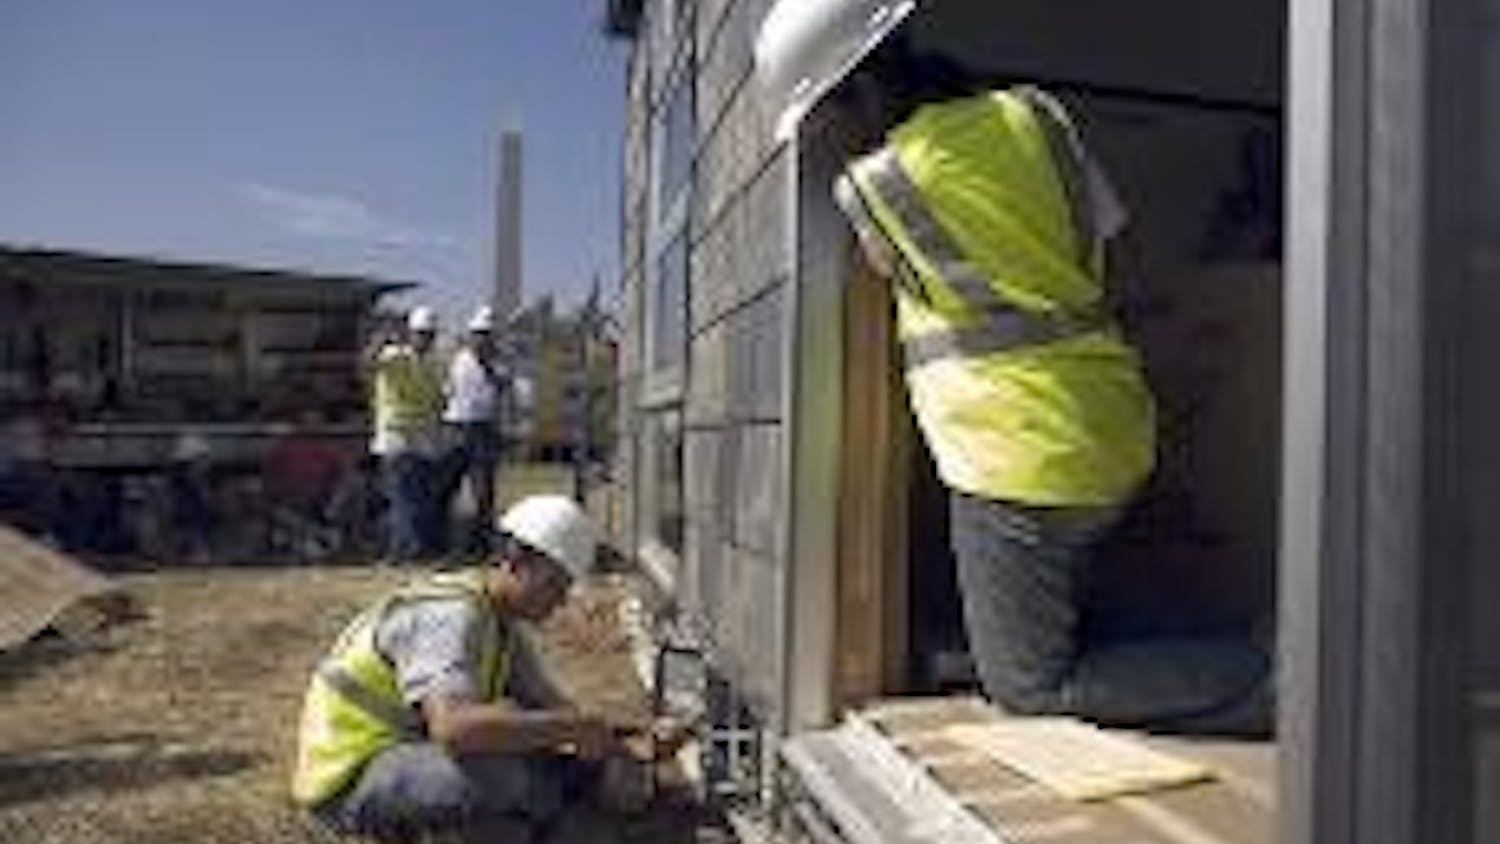 ENERGY EFFICIENT - Students from Penn State work on completing their house for the third annual Solar Decathlon on the National Mall Oct. 4. The entry, called MorningStar, is an 800-square-foot home powered by solar energy. The competition was held from O